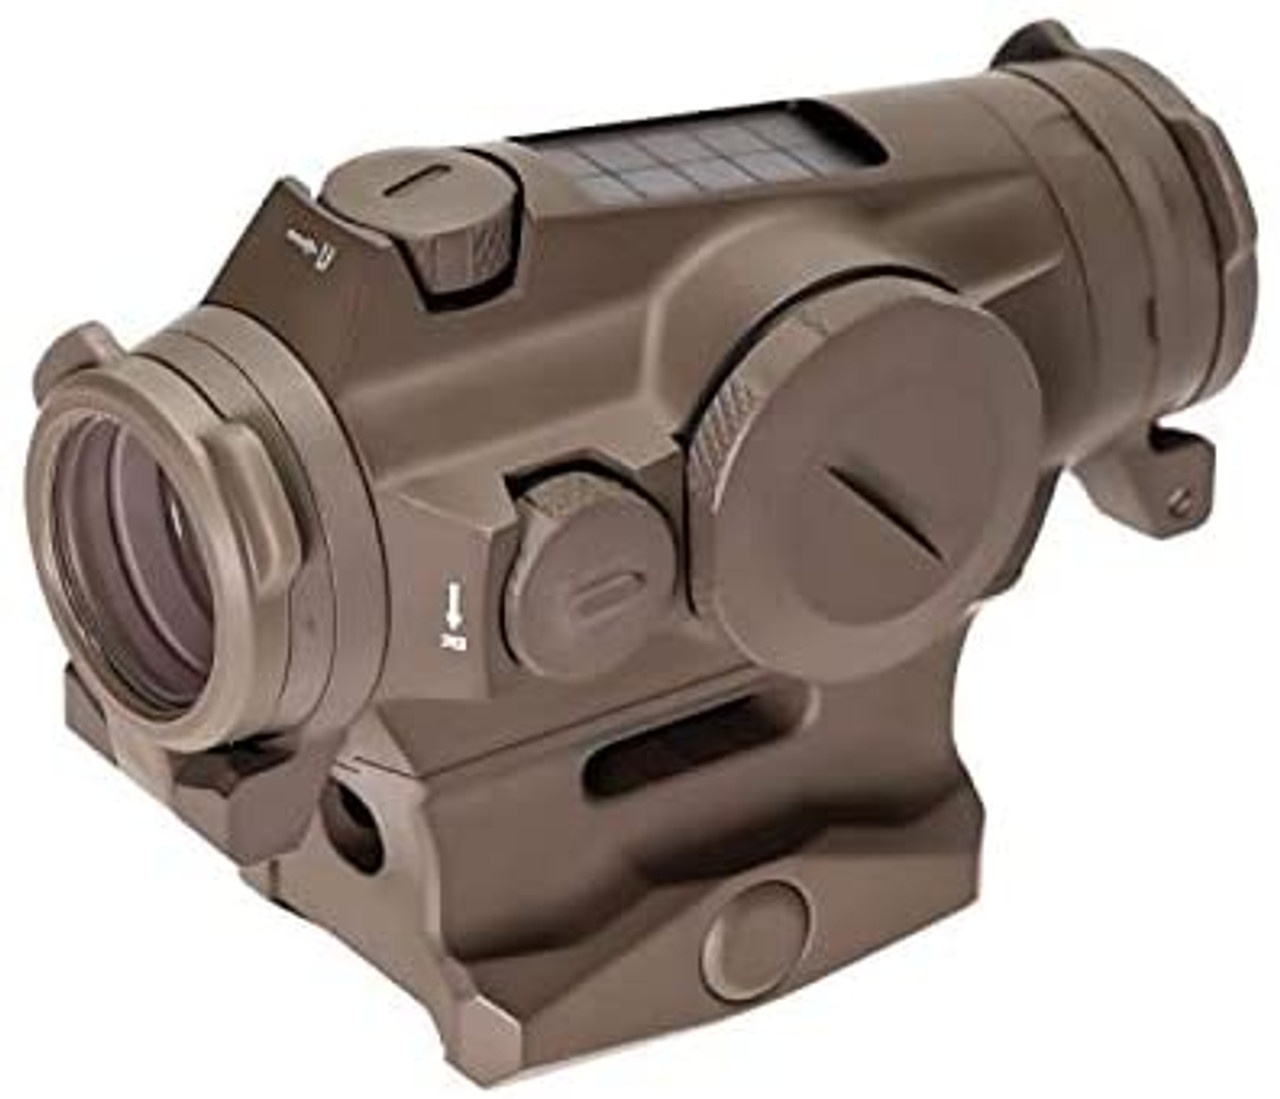 Laylax SIG SAUER ROMEO4T Dot Sight (BALLISTIC CIRCLE DOT reticle) with spacer